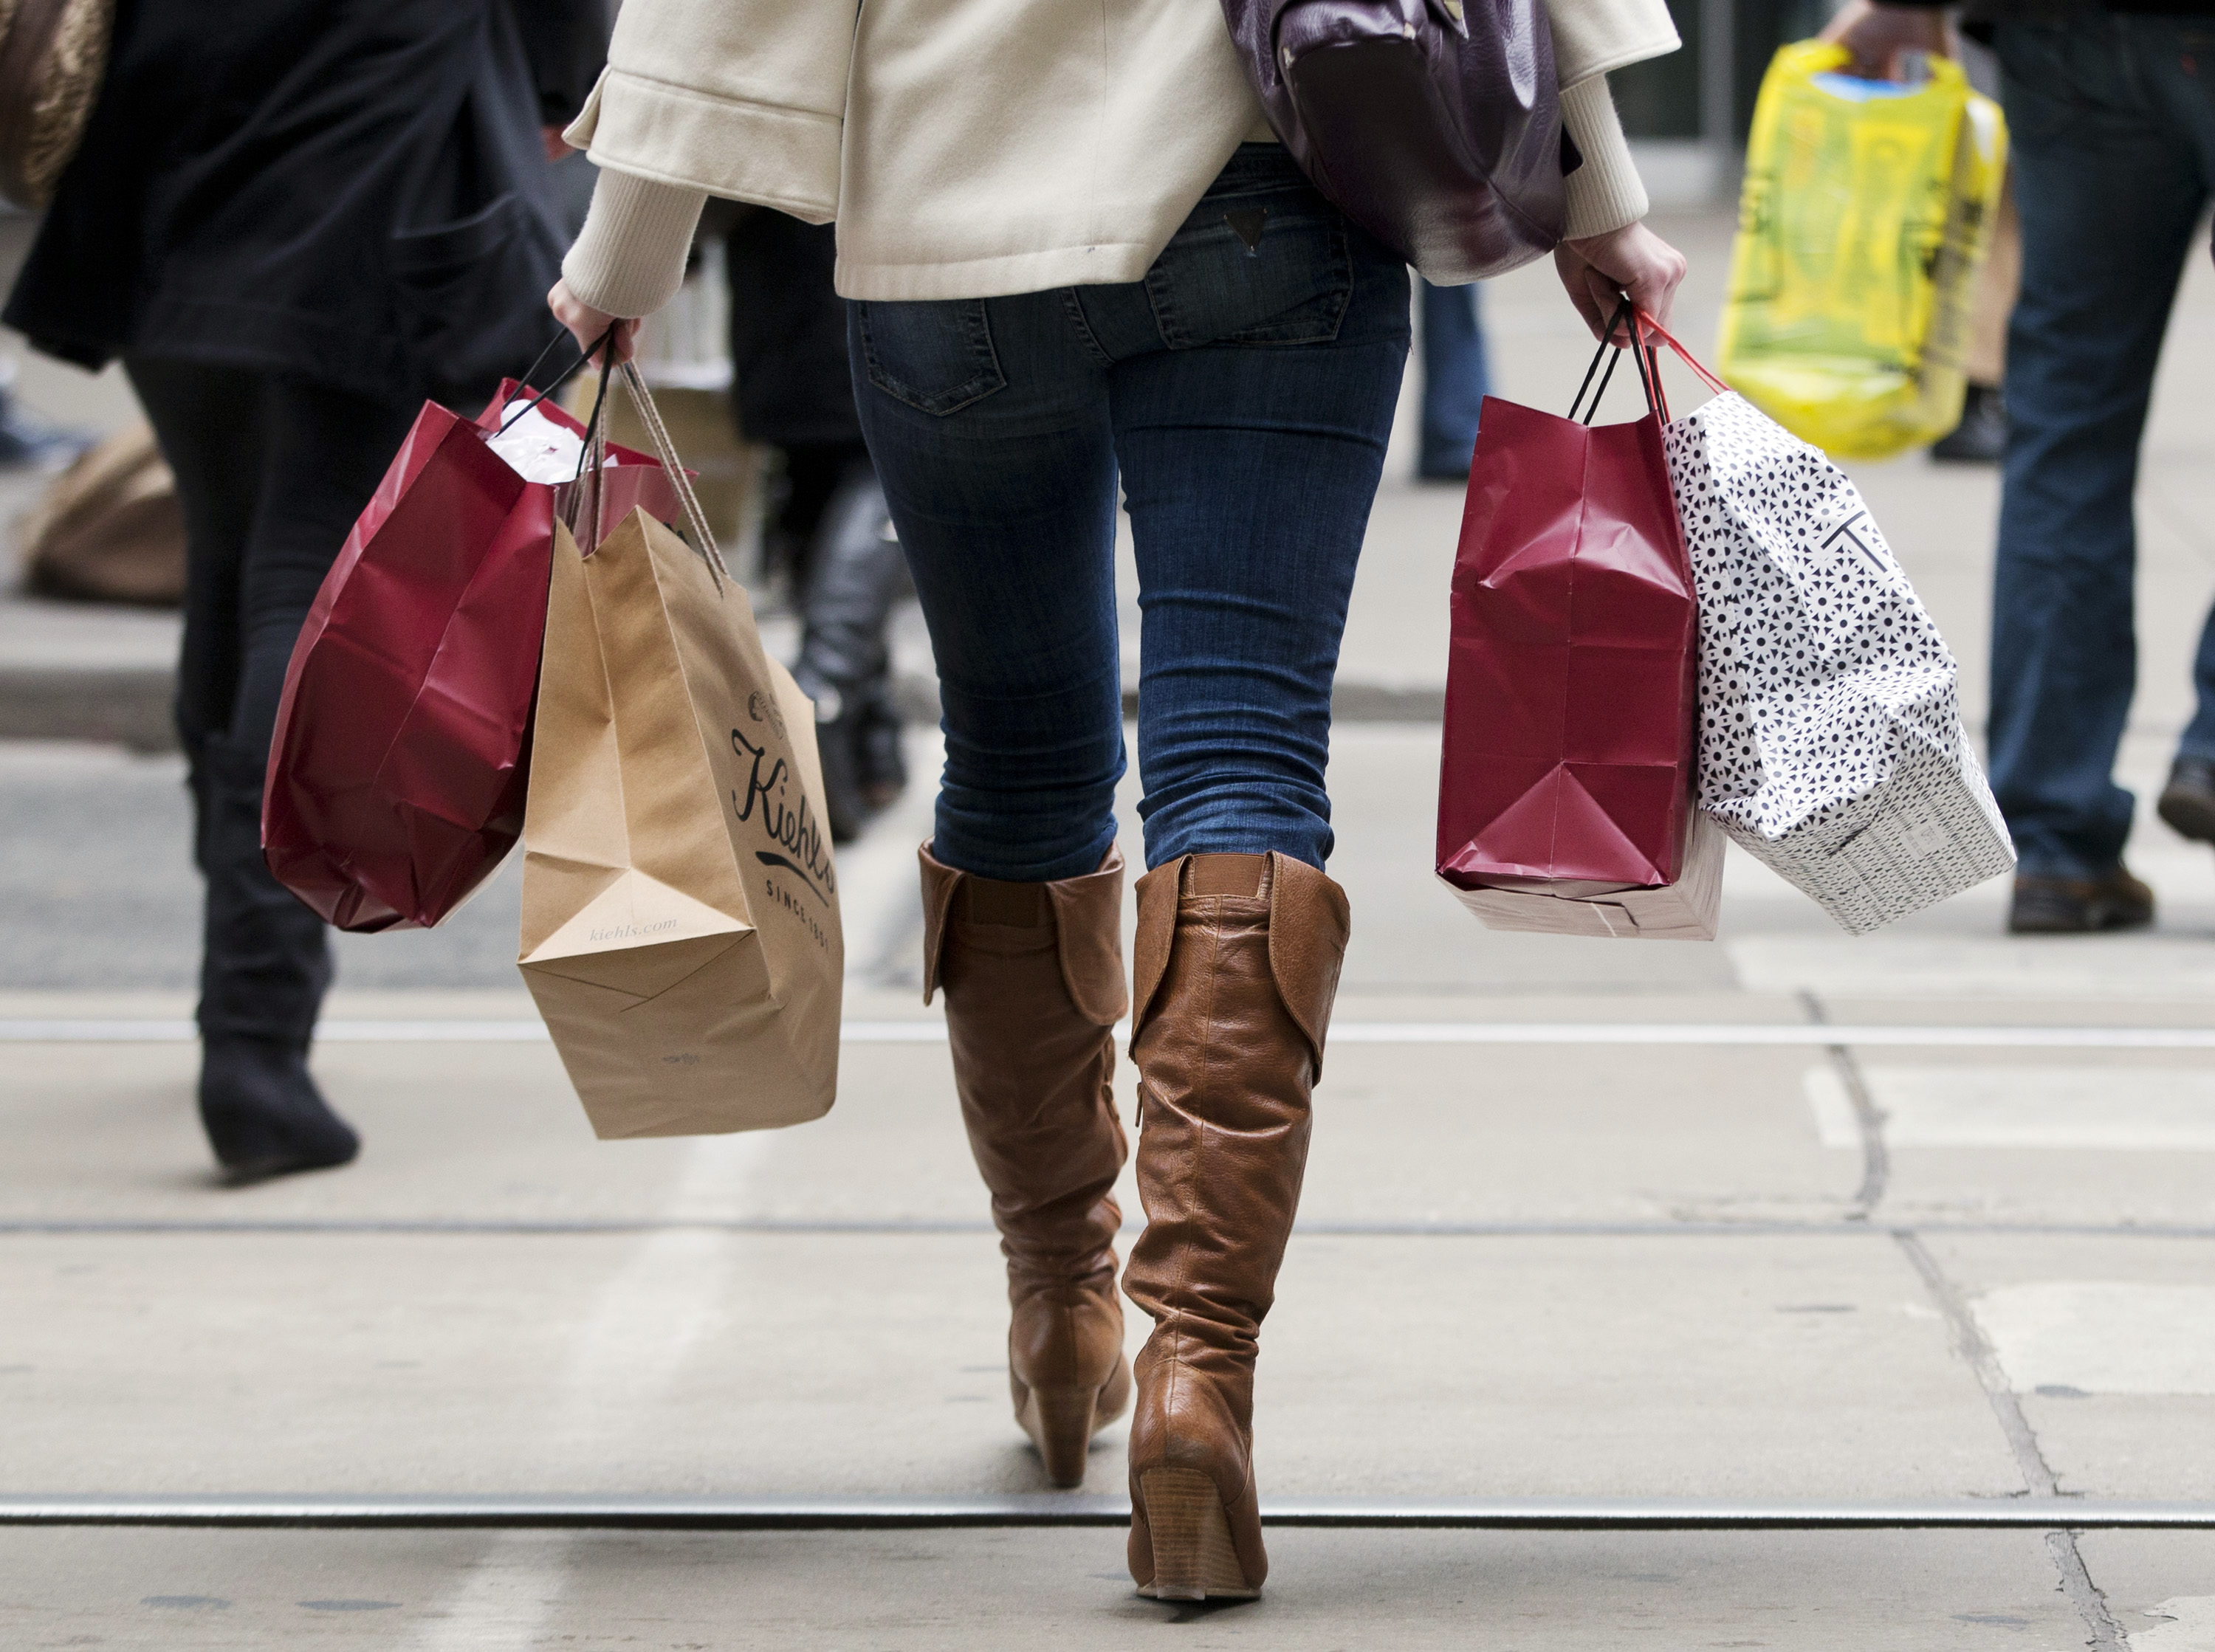 A woman carries shopping bags during the Christmas shopping season in Toronto, December 7, 2012.  REUTERS/Mark Blinch (CANADA - Tags: BUSINESS SOCIETY) - RTR3BBZ7